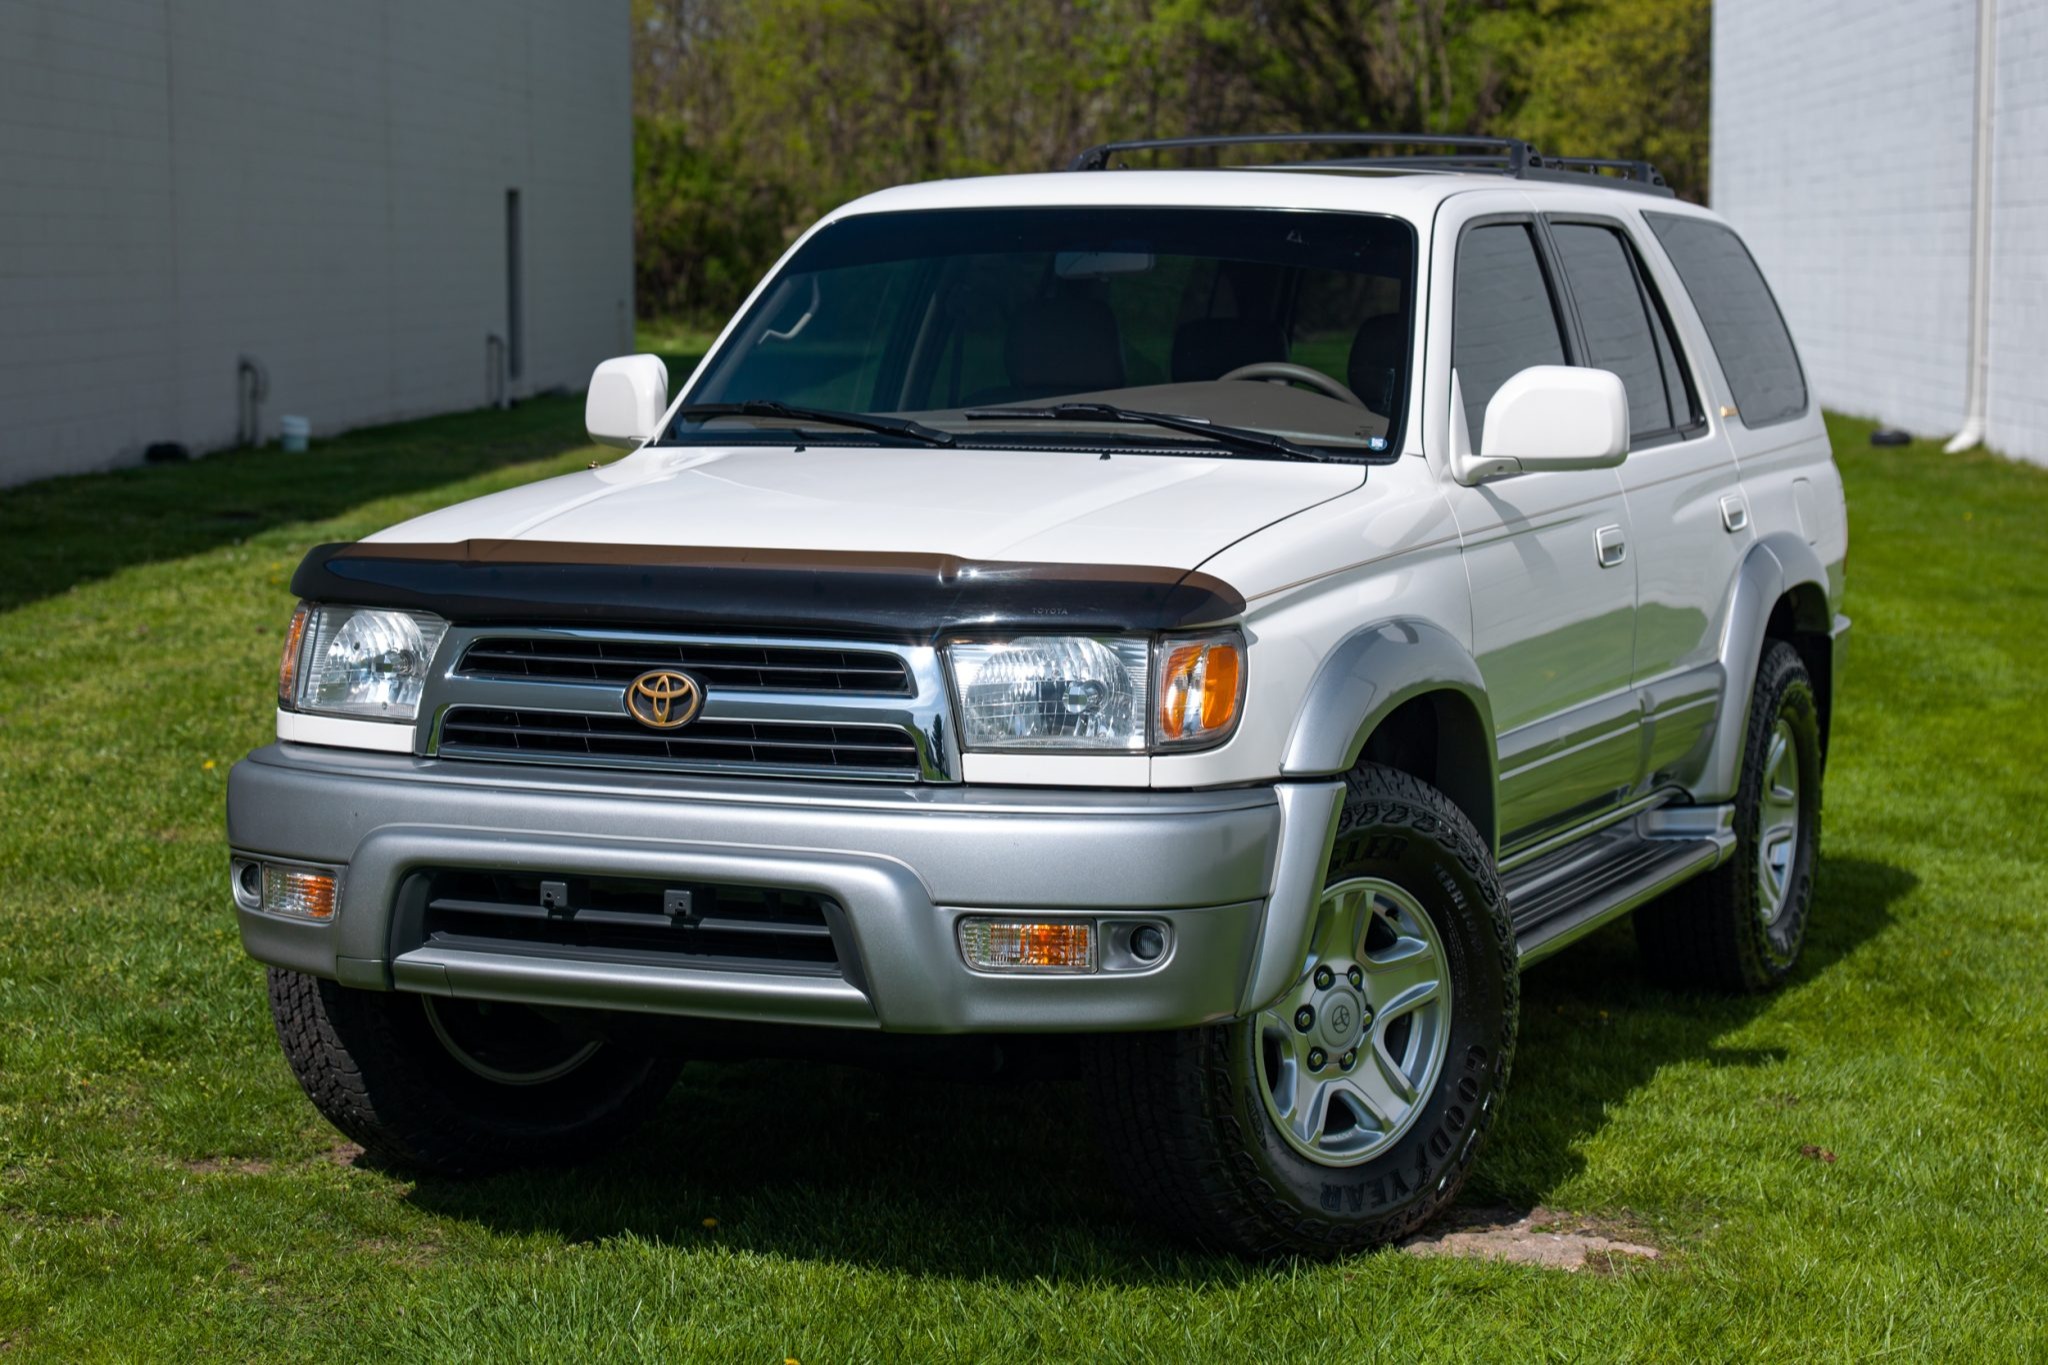 Used 43k-Mile 2000 Toyota 4Runner Limited 4WD Review